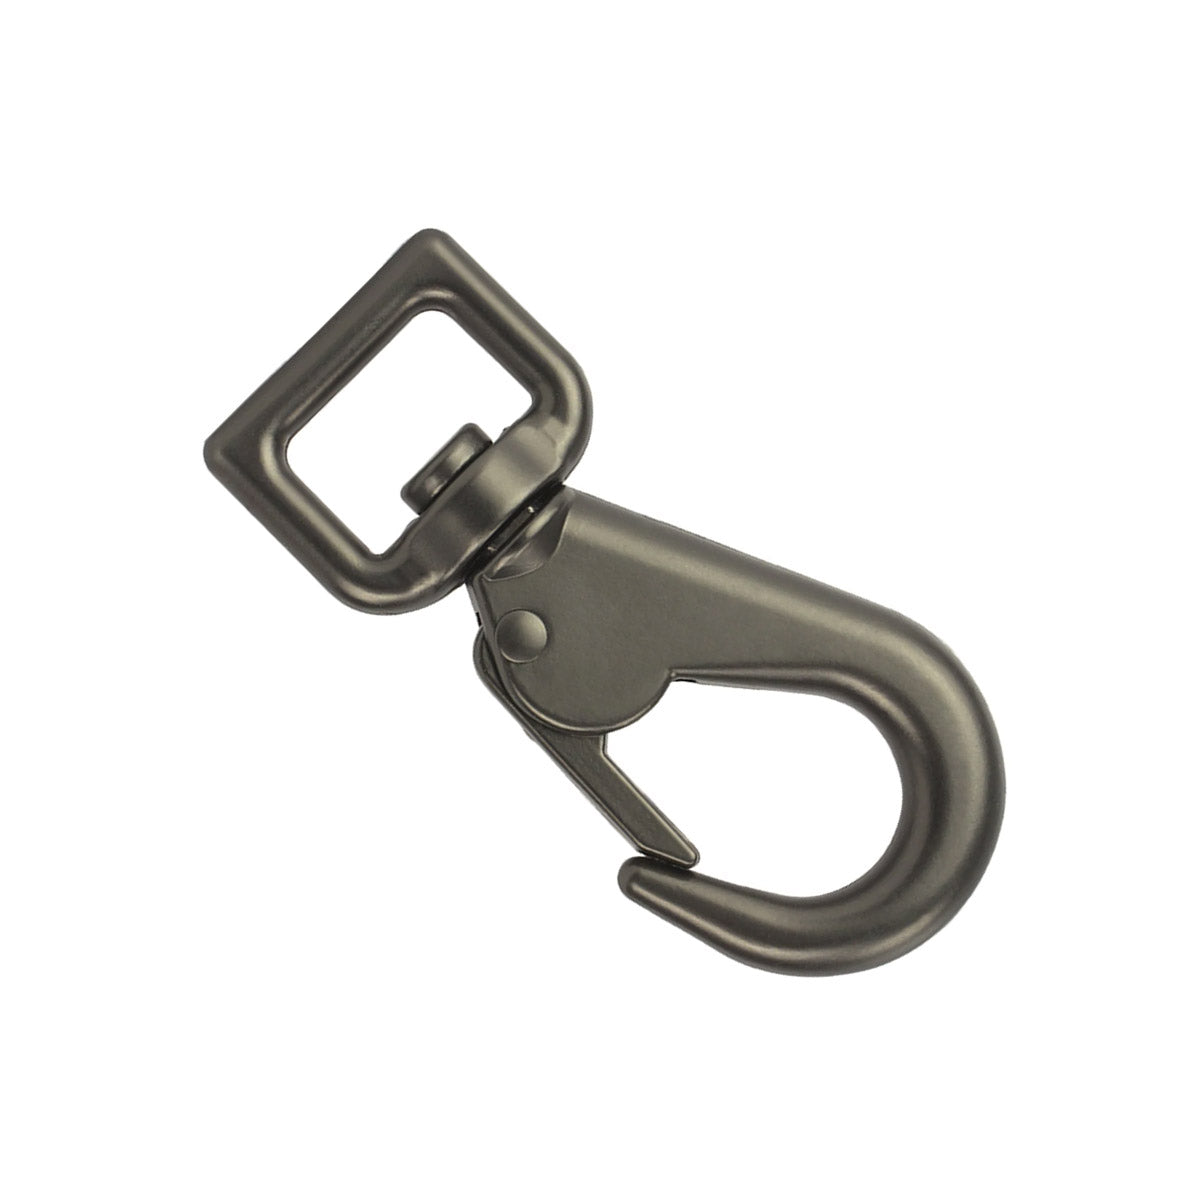 Large swivel carabiner for leather goods